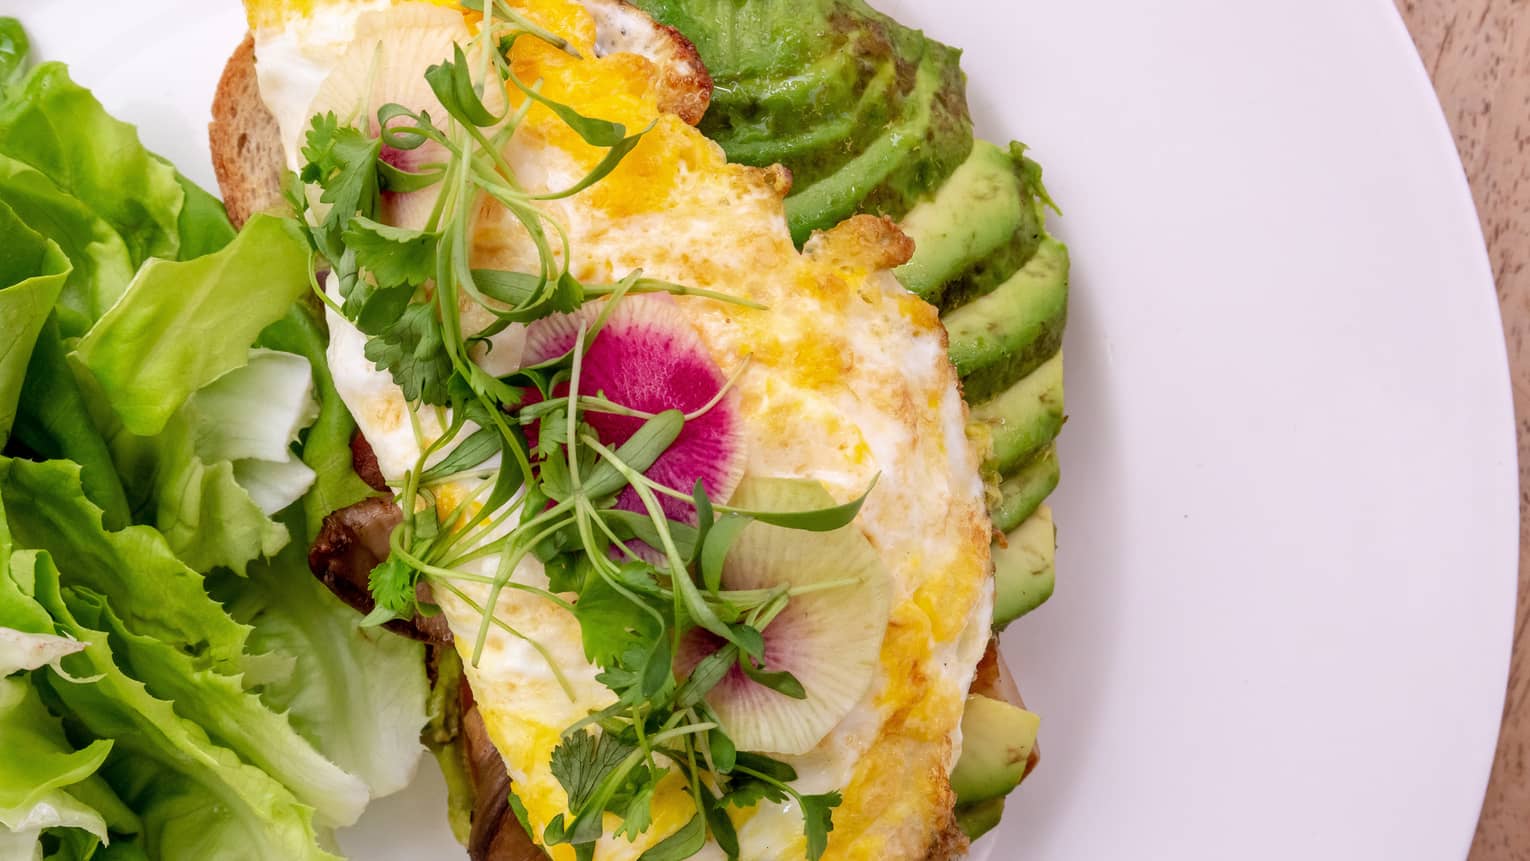 Avocado toast with egg and watercress on top